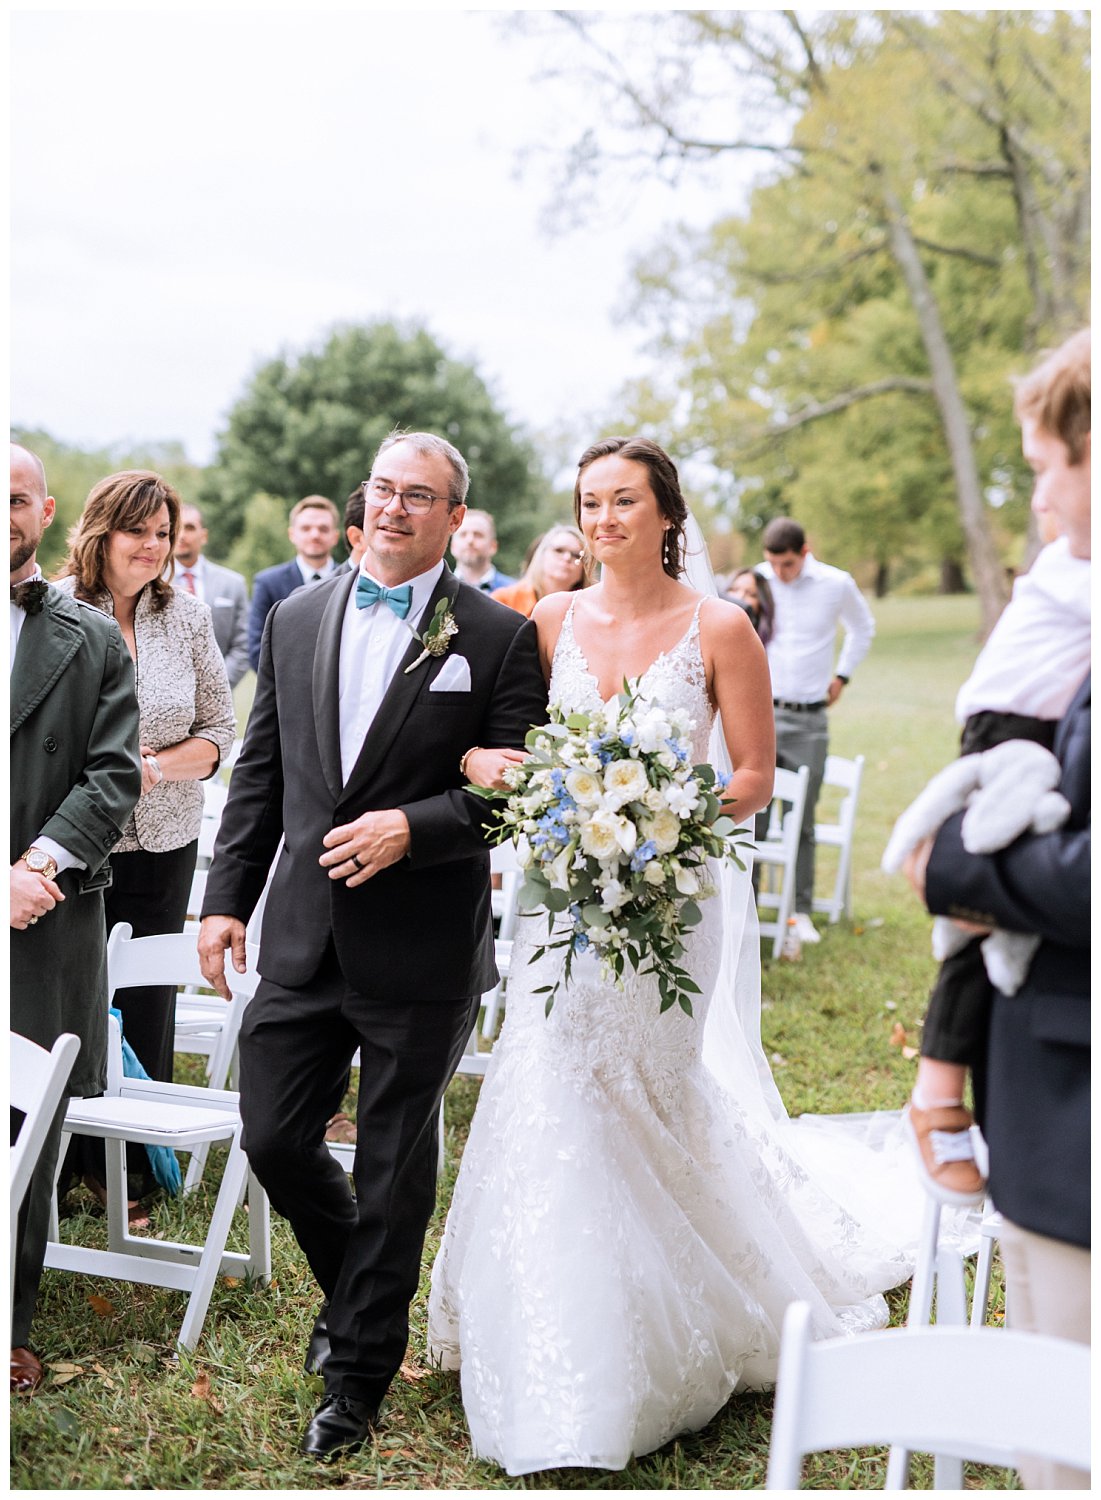 Father escorting bride down the aisle at Westover & Maymont Gardens wedding